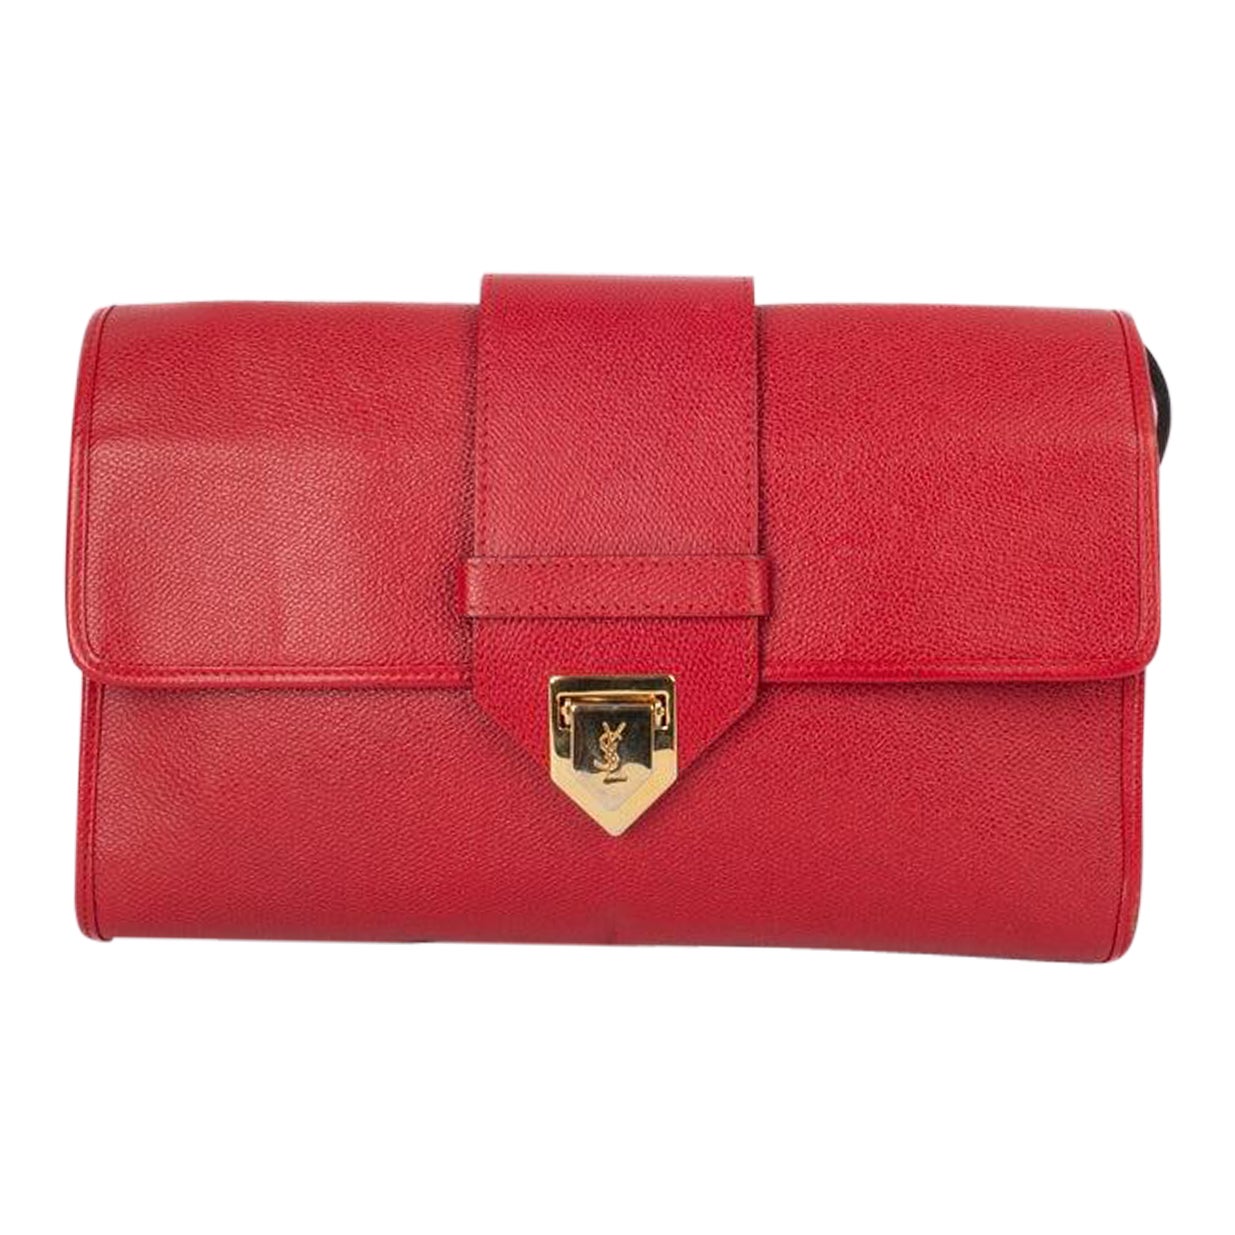 Yves Saint Laurent Red Leather Bag For Sale